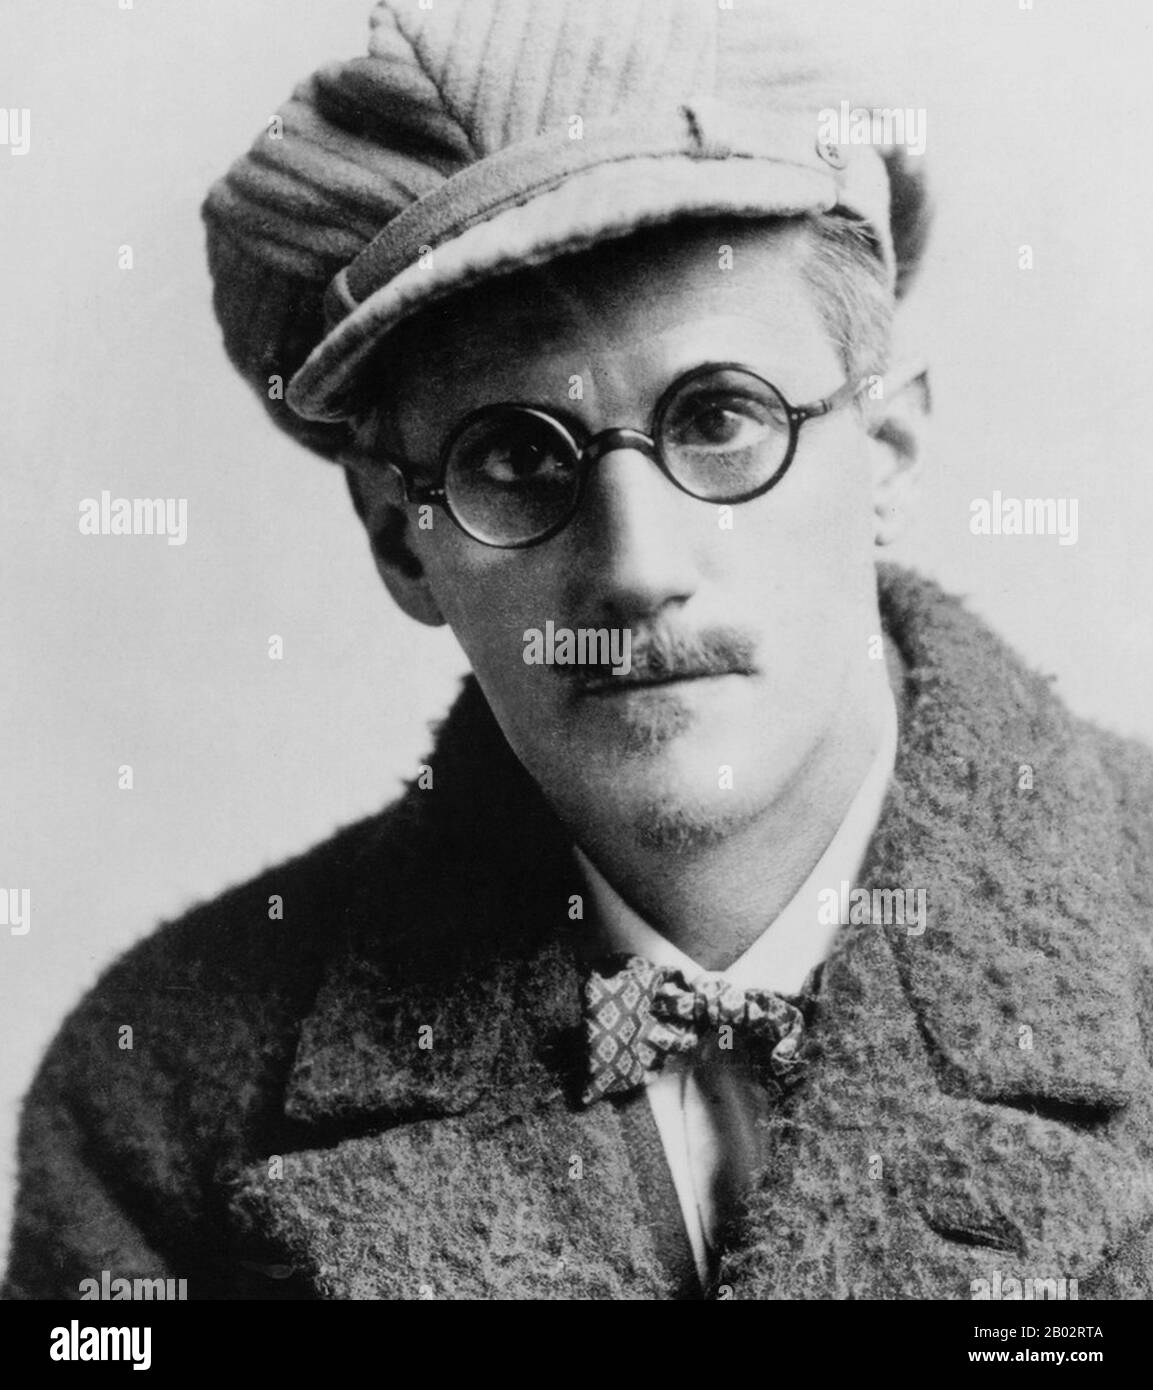 James Augustine Aloysius Joyce (2 February 1882 – 13 January 1941) was an Irish novelist and poet, considered to be one of the most influential writers in the modernist avant-garde of the early 20th century.  Joyce is best known for Ulysses (1922), a landmark work in which the episodes of Homer's Odyssey are paralleled in an array of contrasting literary styles. Other well-known works are the short-story collection Dubliners (1914), and the novels A Portrait of the Artist as a Young Man (1916) and Finnegans Wake (1939). His other writings include three books of poetry, a play, occasional journ Stock Photo